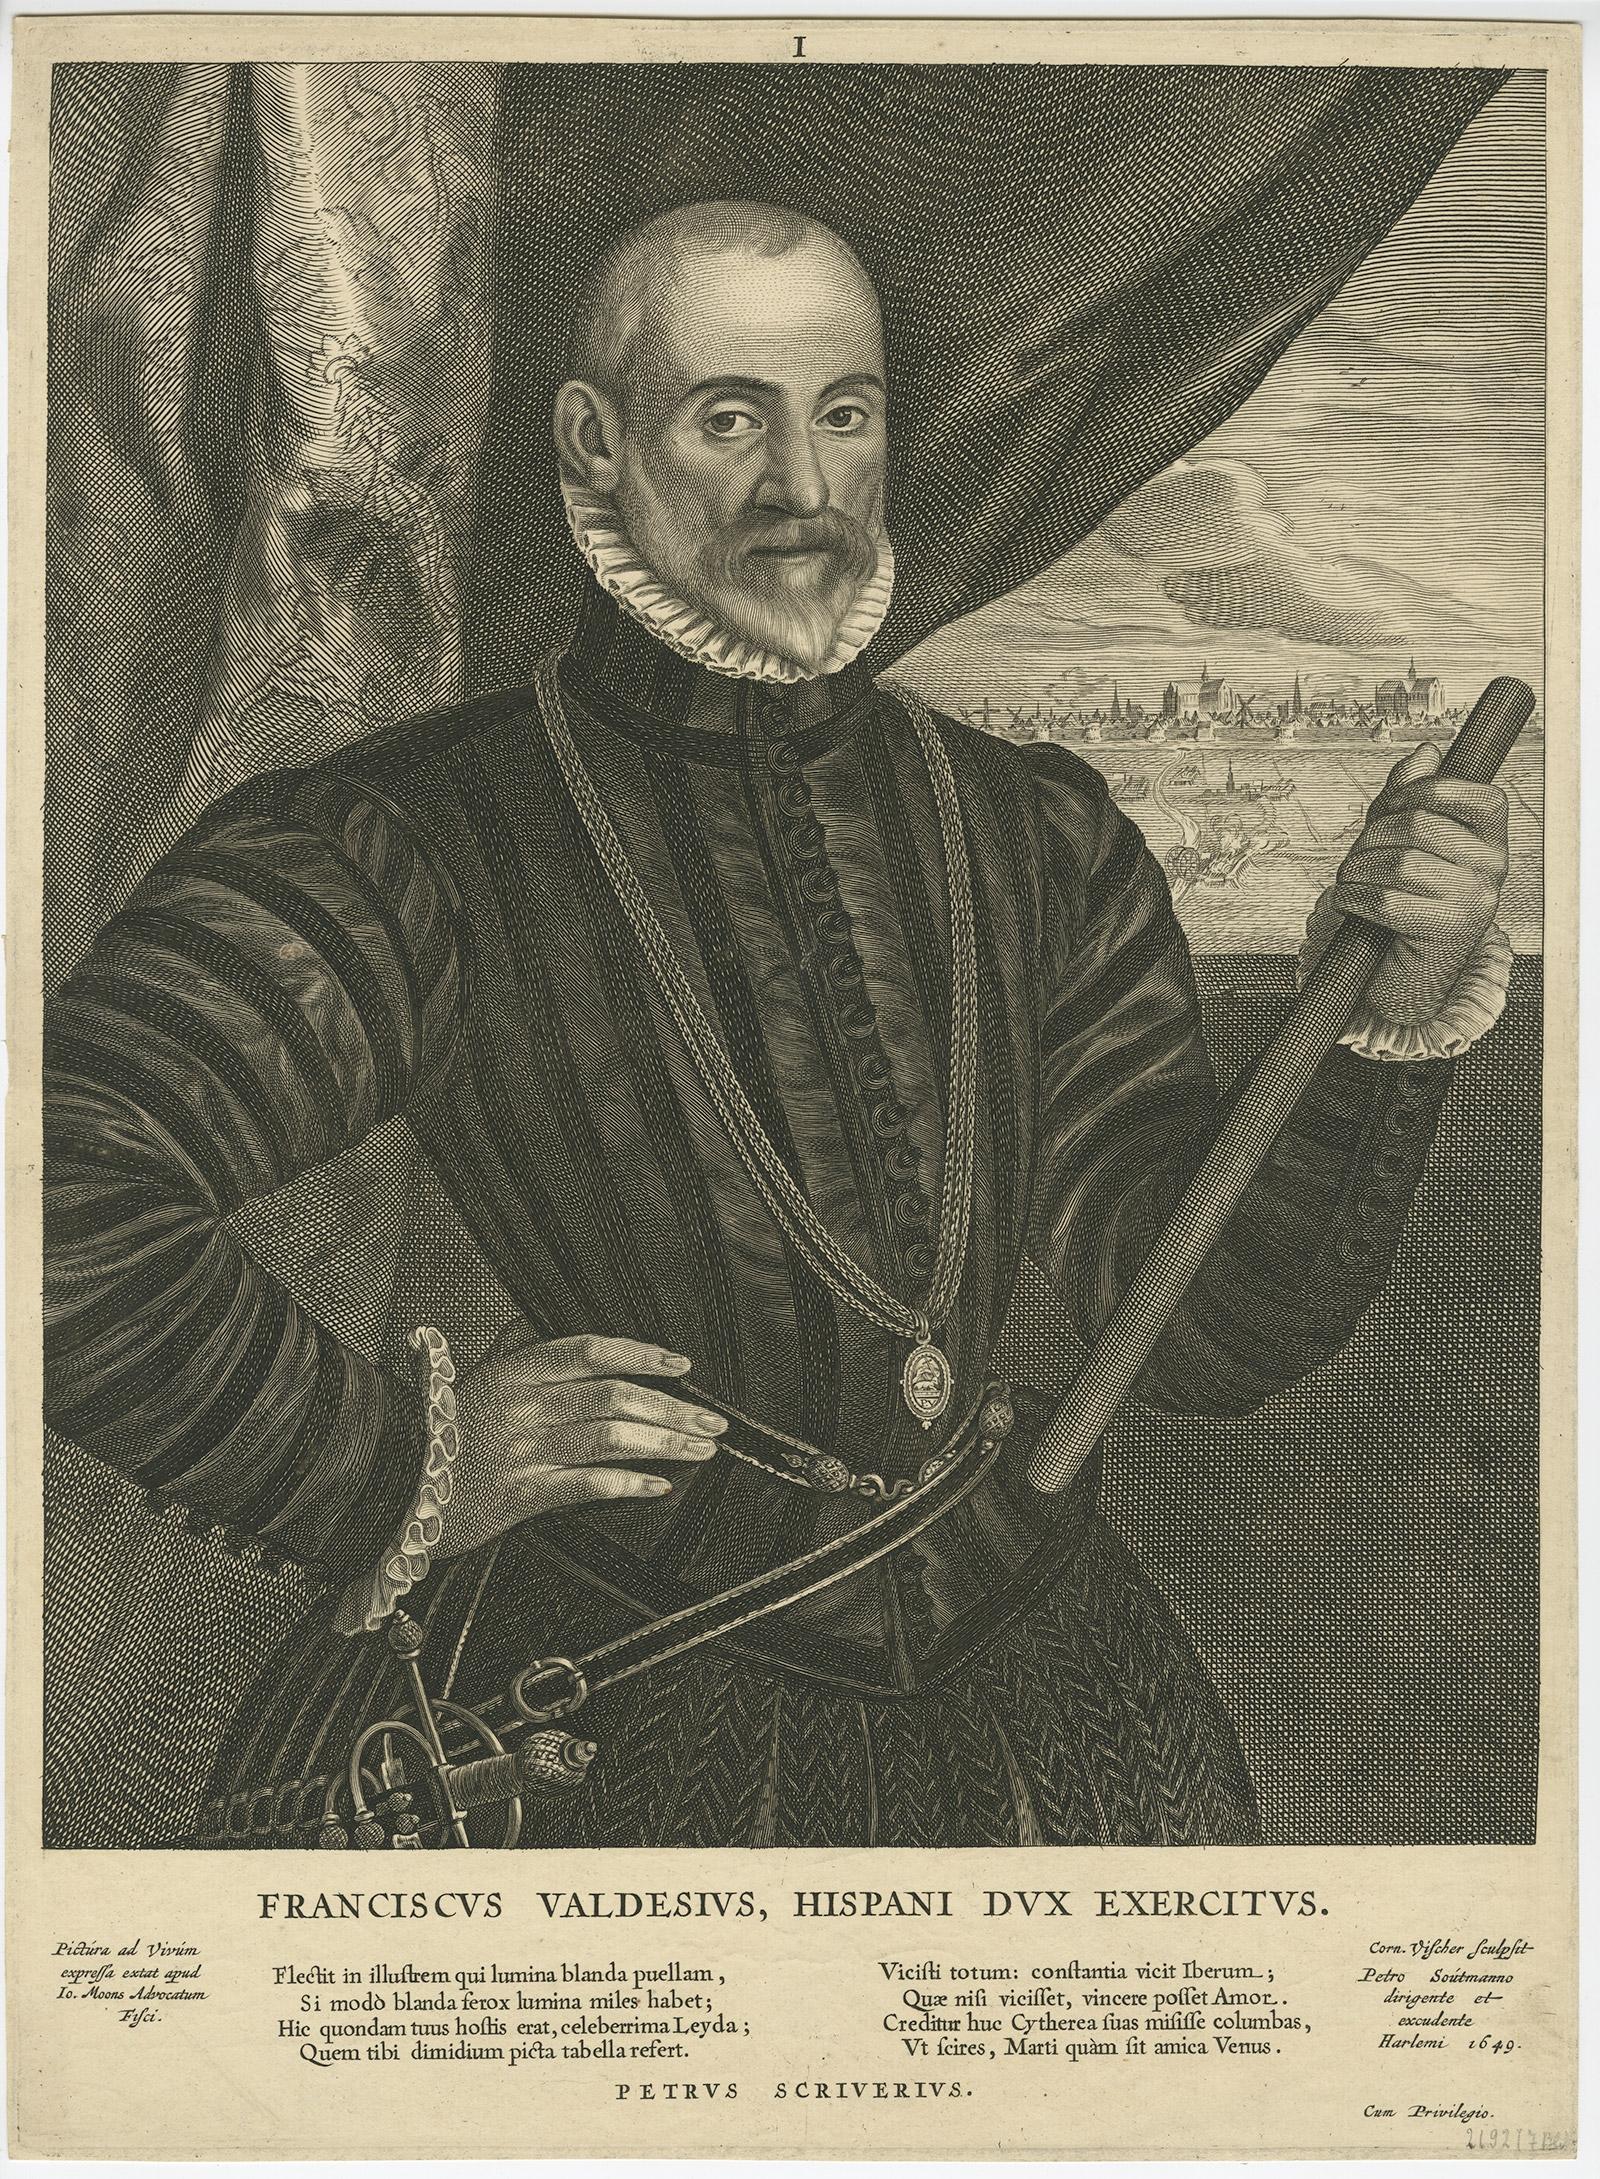 Antique print, titled: 'Franciscus Valdesius, Hispani Dux exercitus' - Very rare half length portrait of Franciscus Valdesius ( Francis Valdez, Valdes or Baldes), printed in 1649. Franciscus Valdesius ( Valdez) is known is known as the Commander of